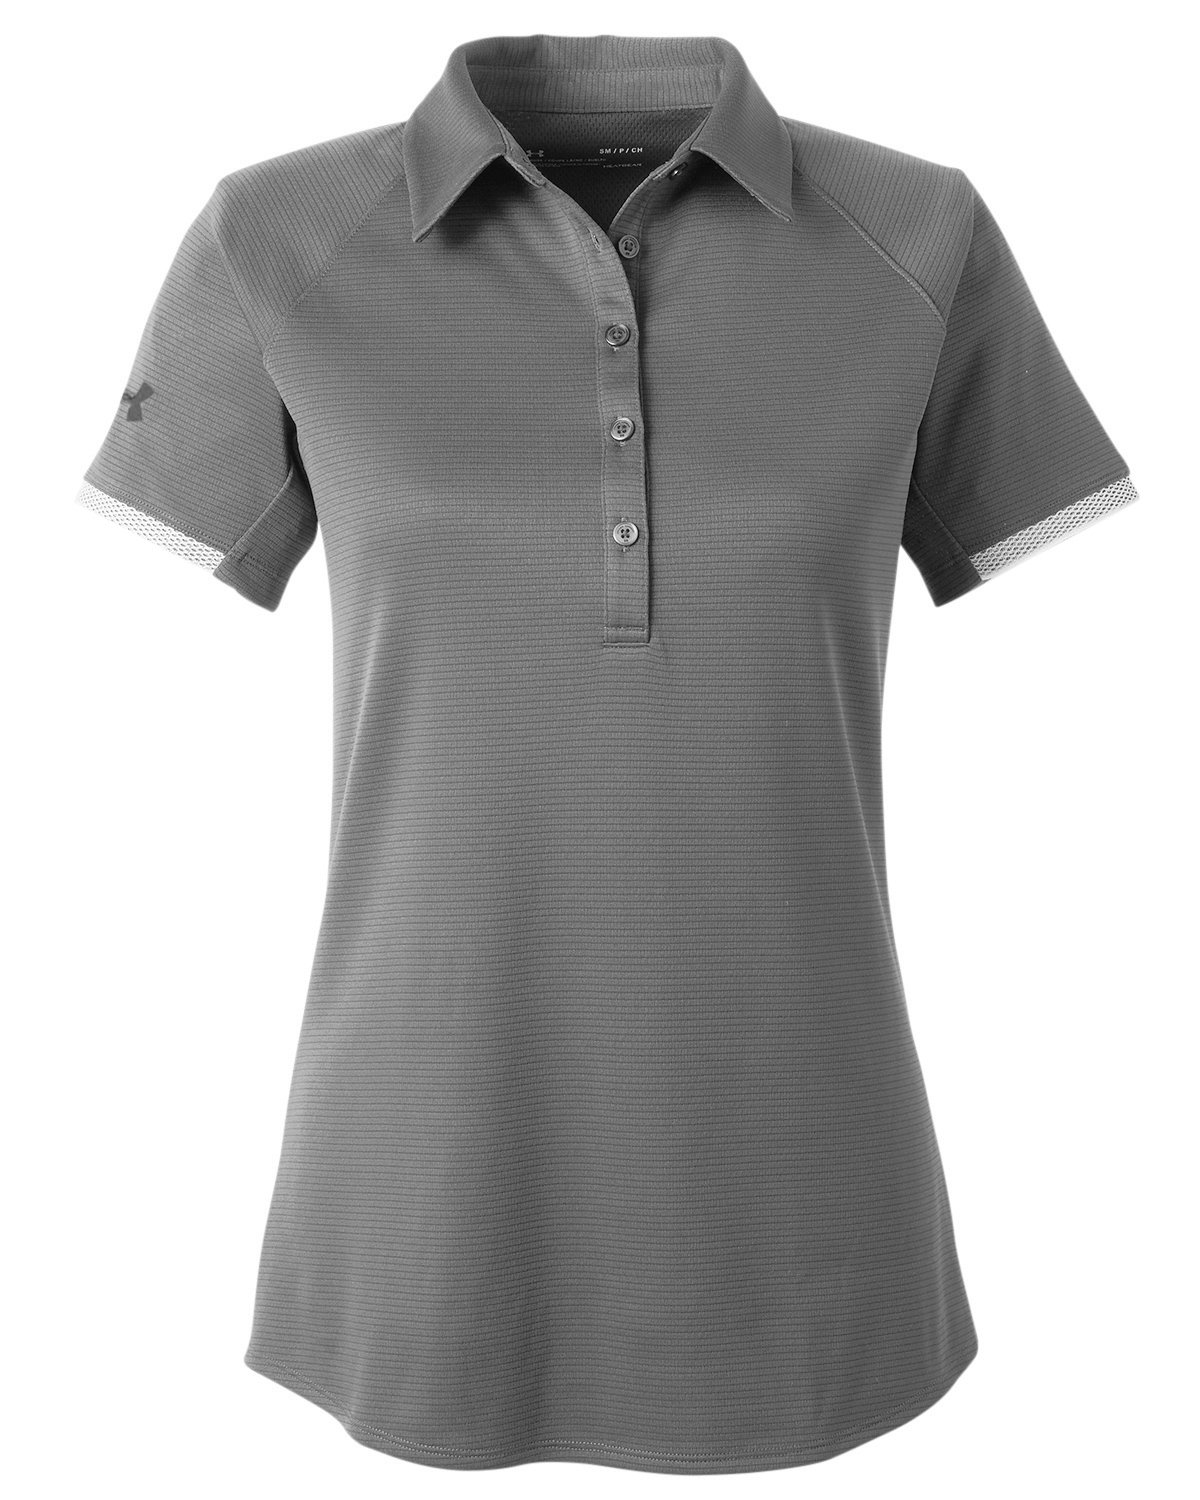 Under Armour Ladies' Corporate Rival Polo | alphabroder